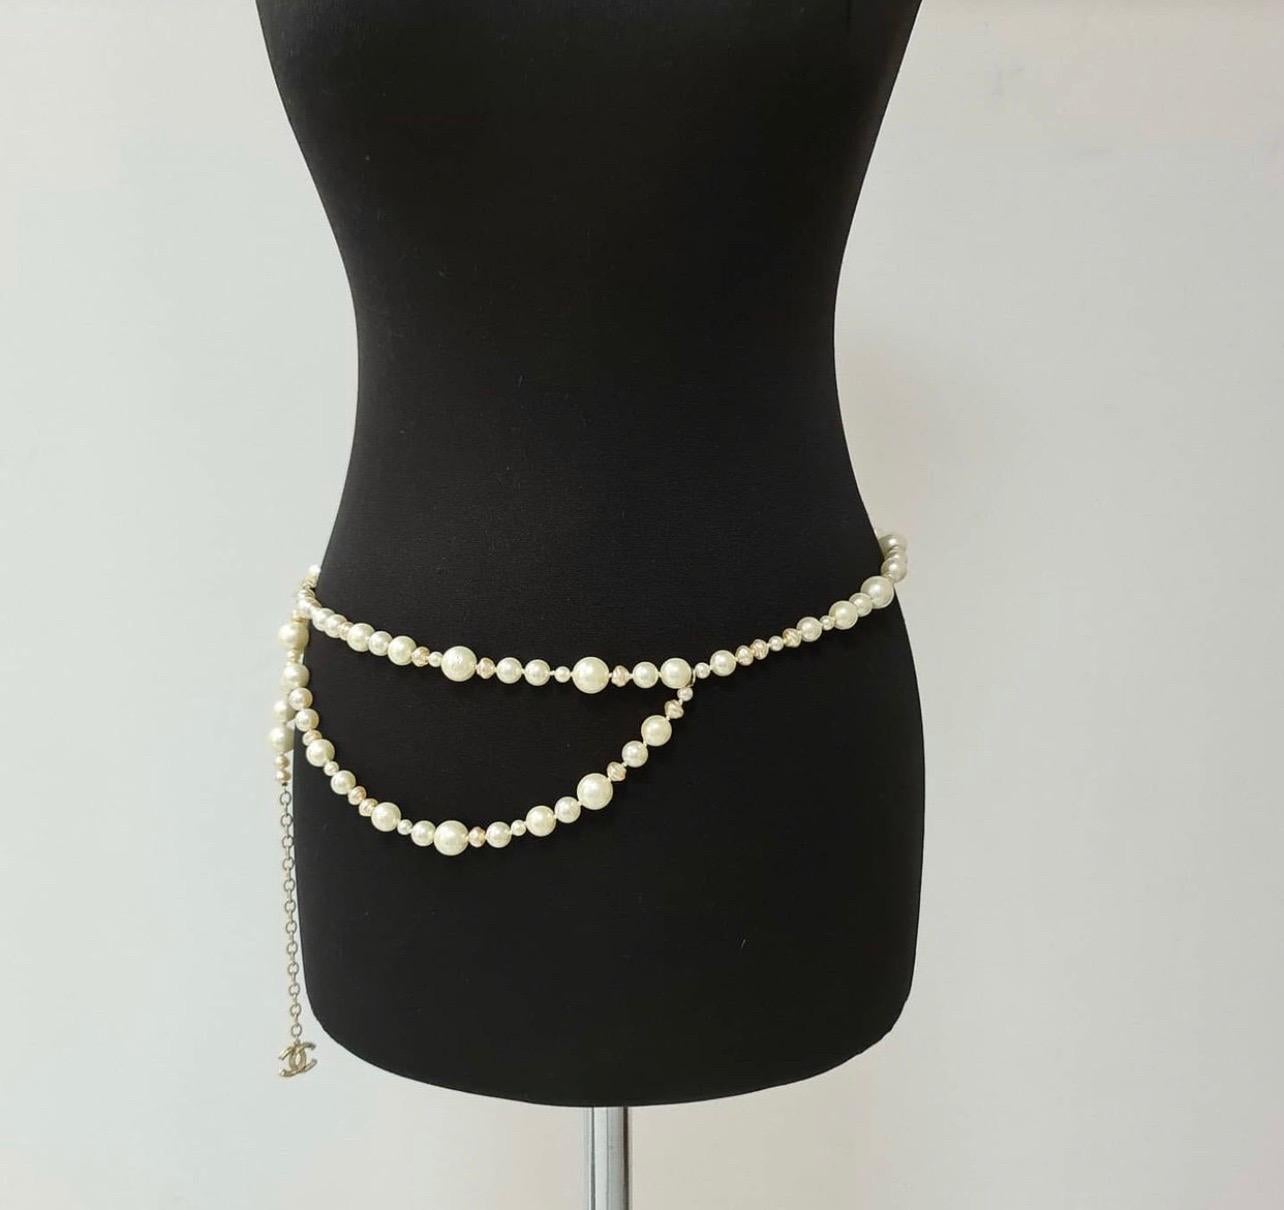 Chanel 10A Faux Pearl CC Logo Belt Necklace features gorgeous faux pearl details, with CC logo detail. Wear as a necklace or a belt! 
Overall Condition: Excellent

Material: Metal, Faux Pearl

Includes: None

Origin: France

Production Year: